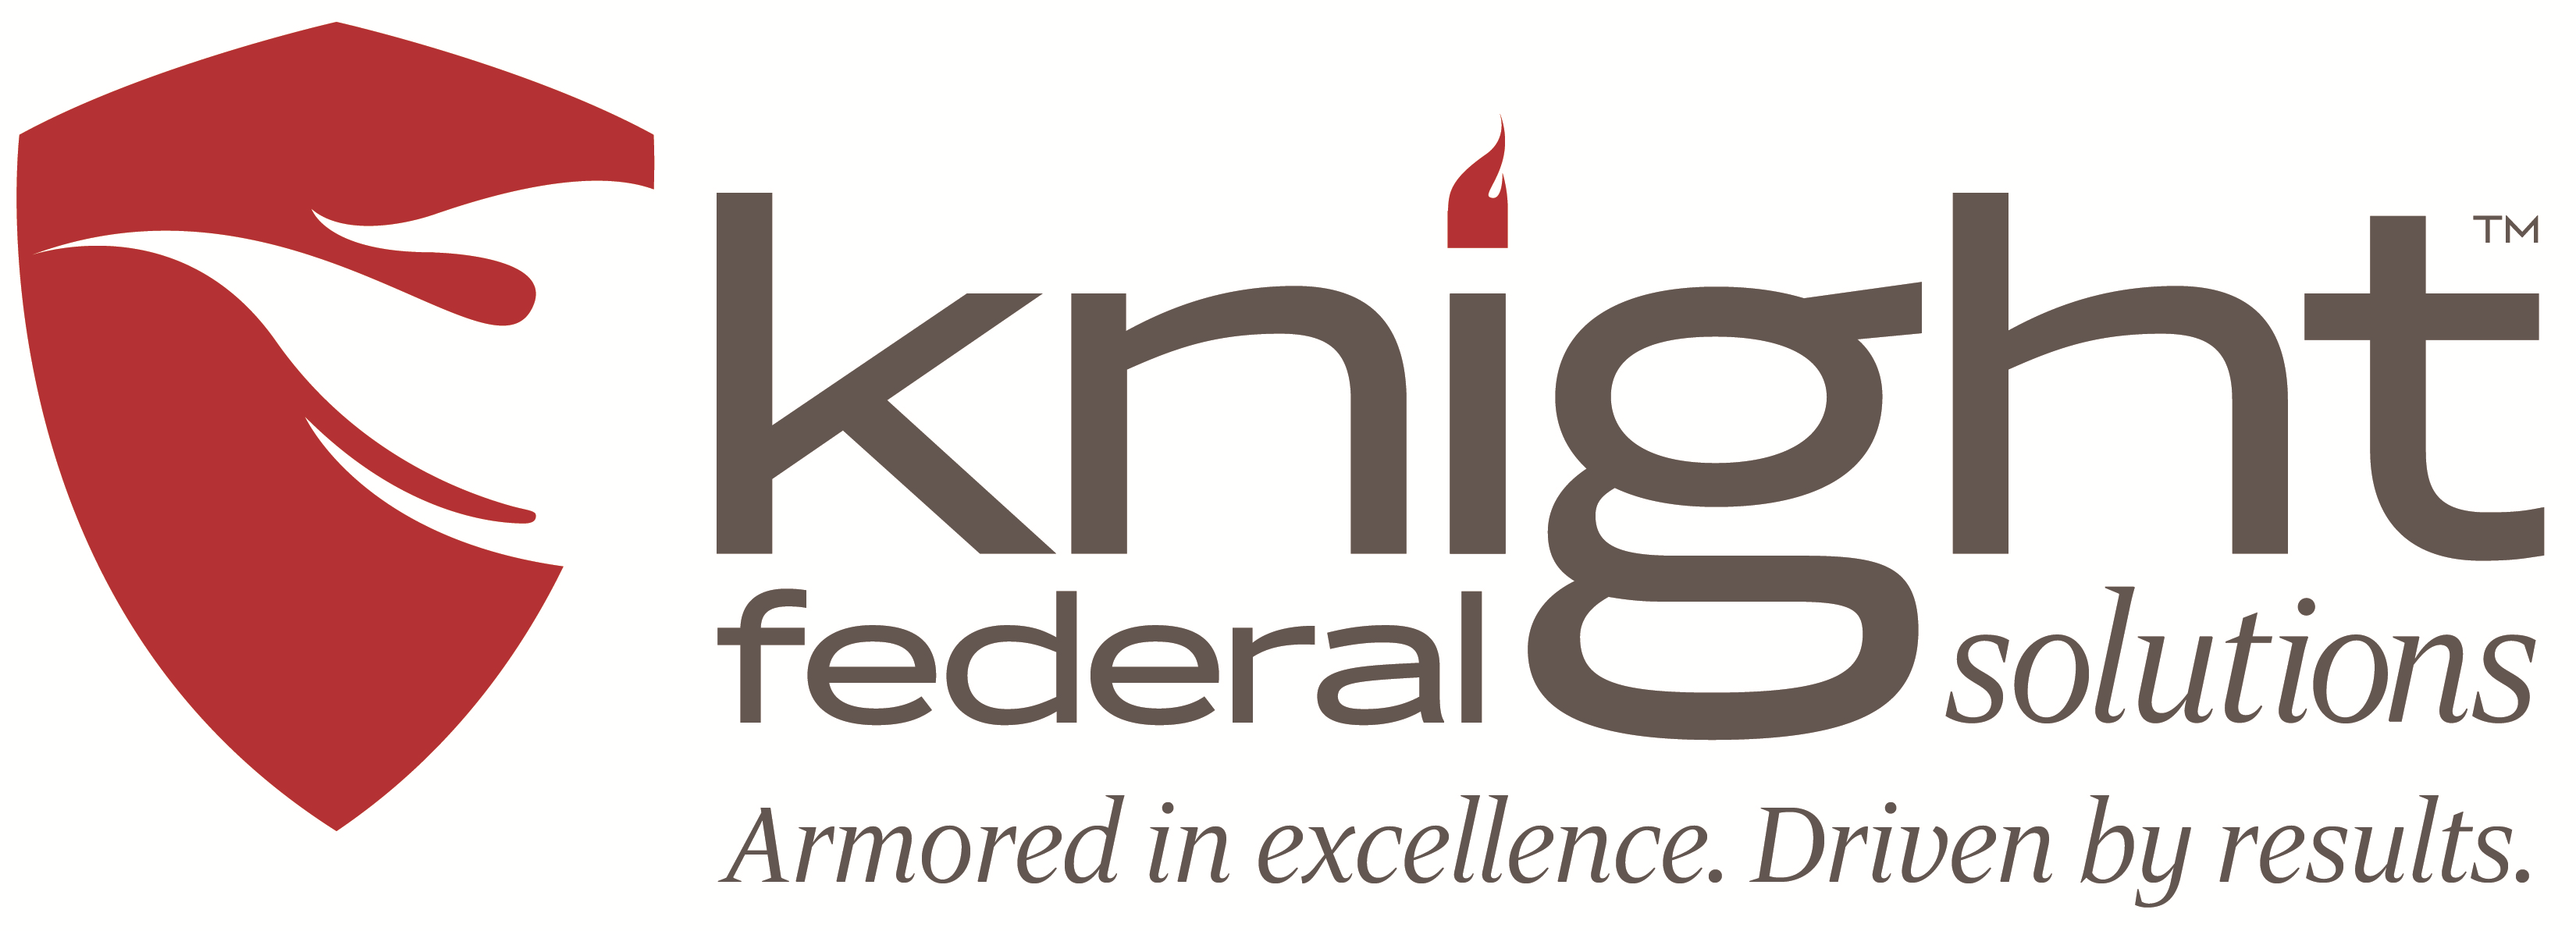 Knight Federal Solutions Company Logo